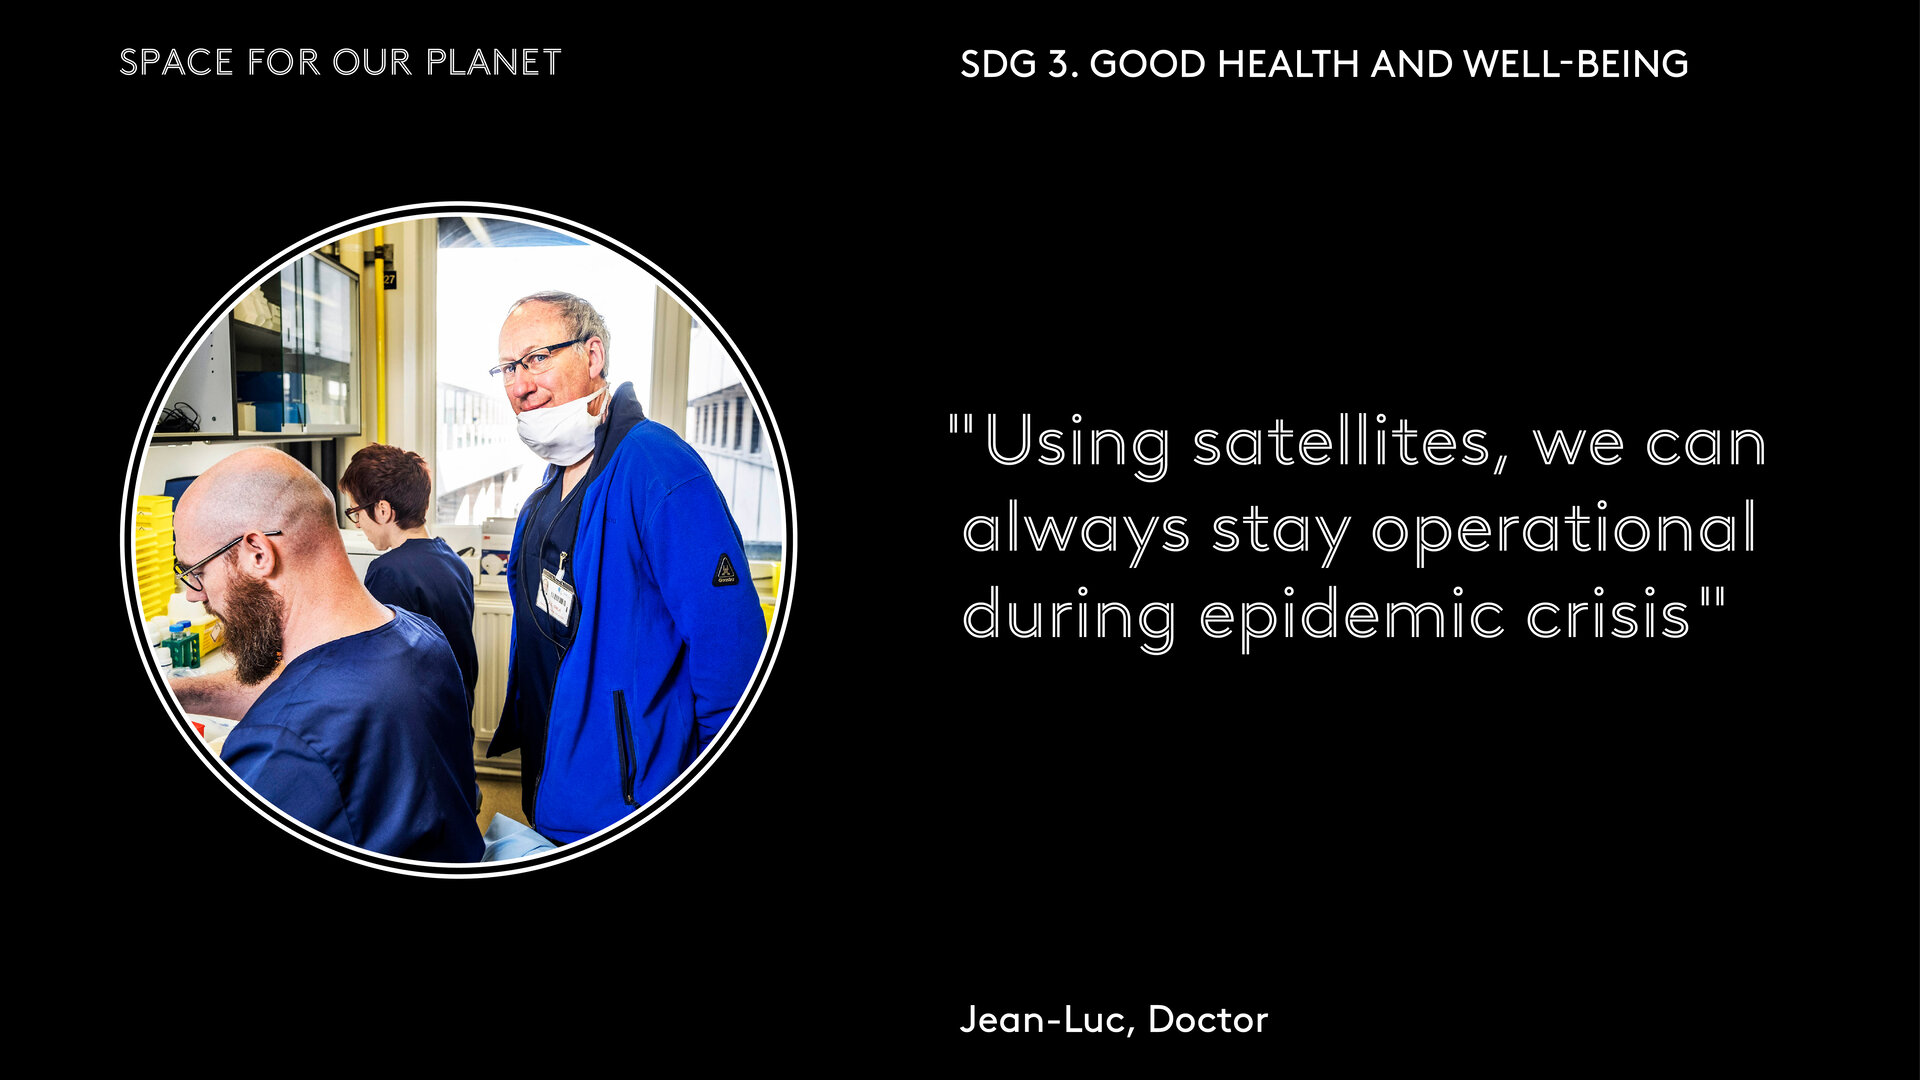 "Using satellites, we can always stay operational during epidemic crisis"